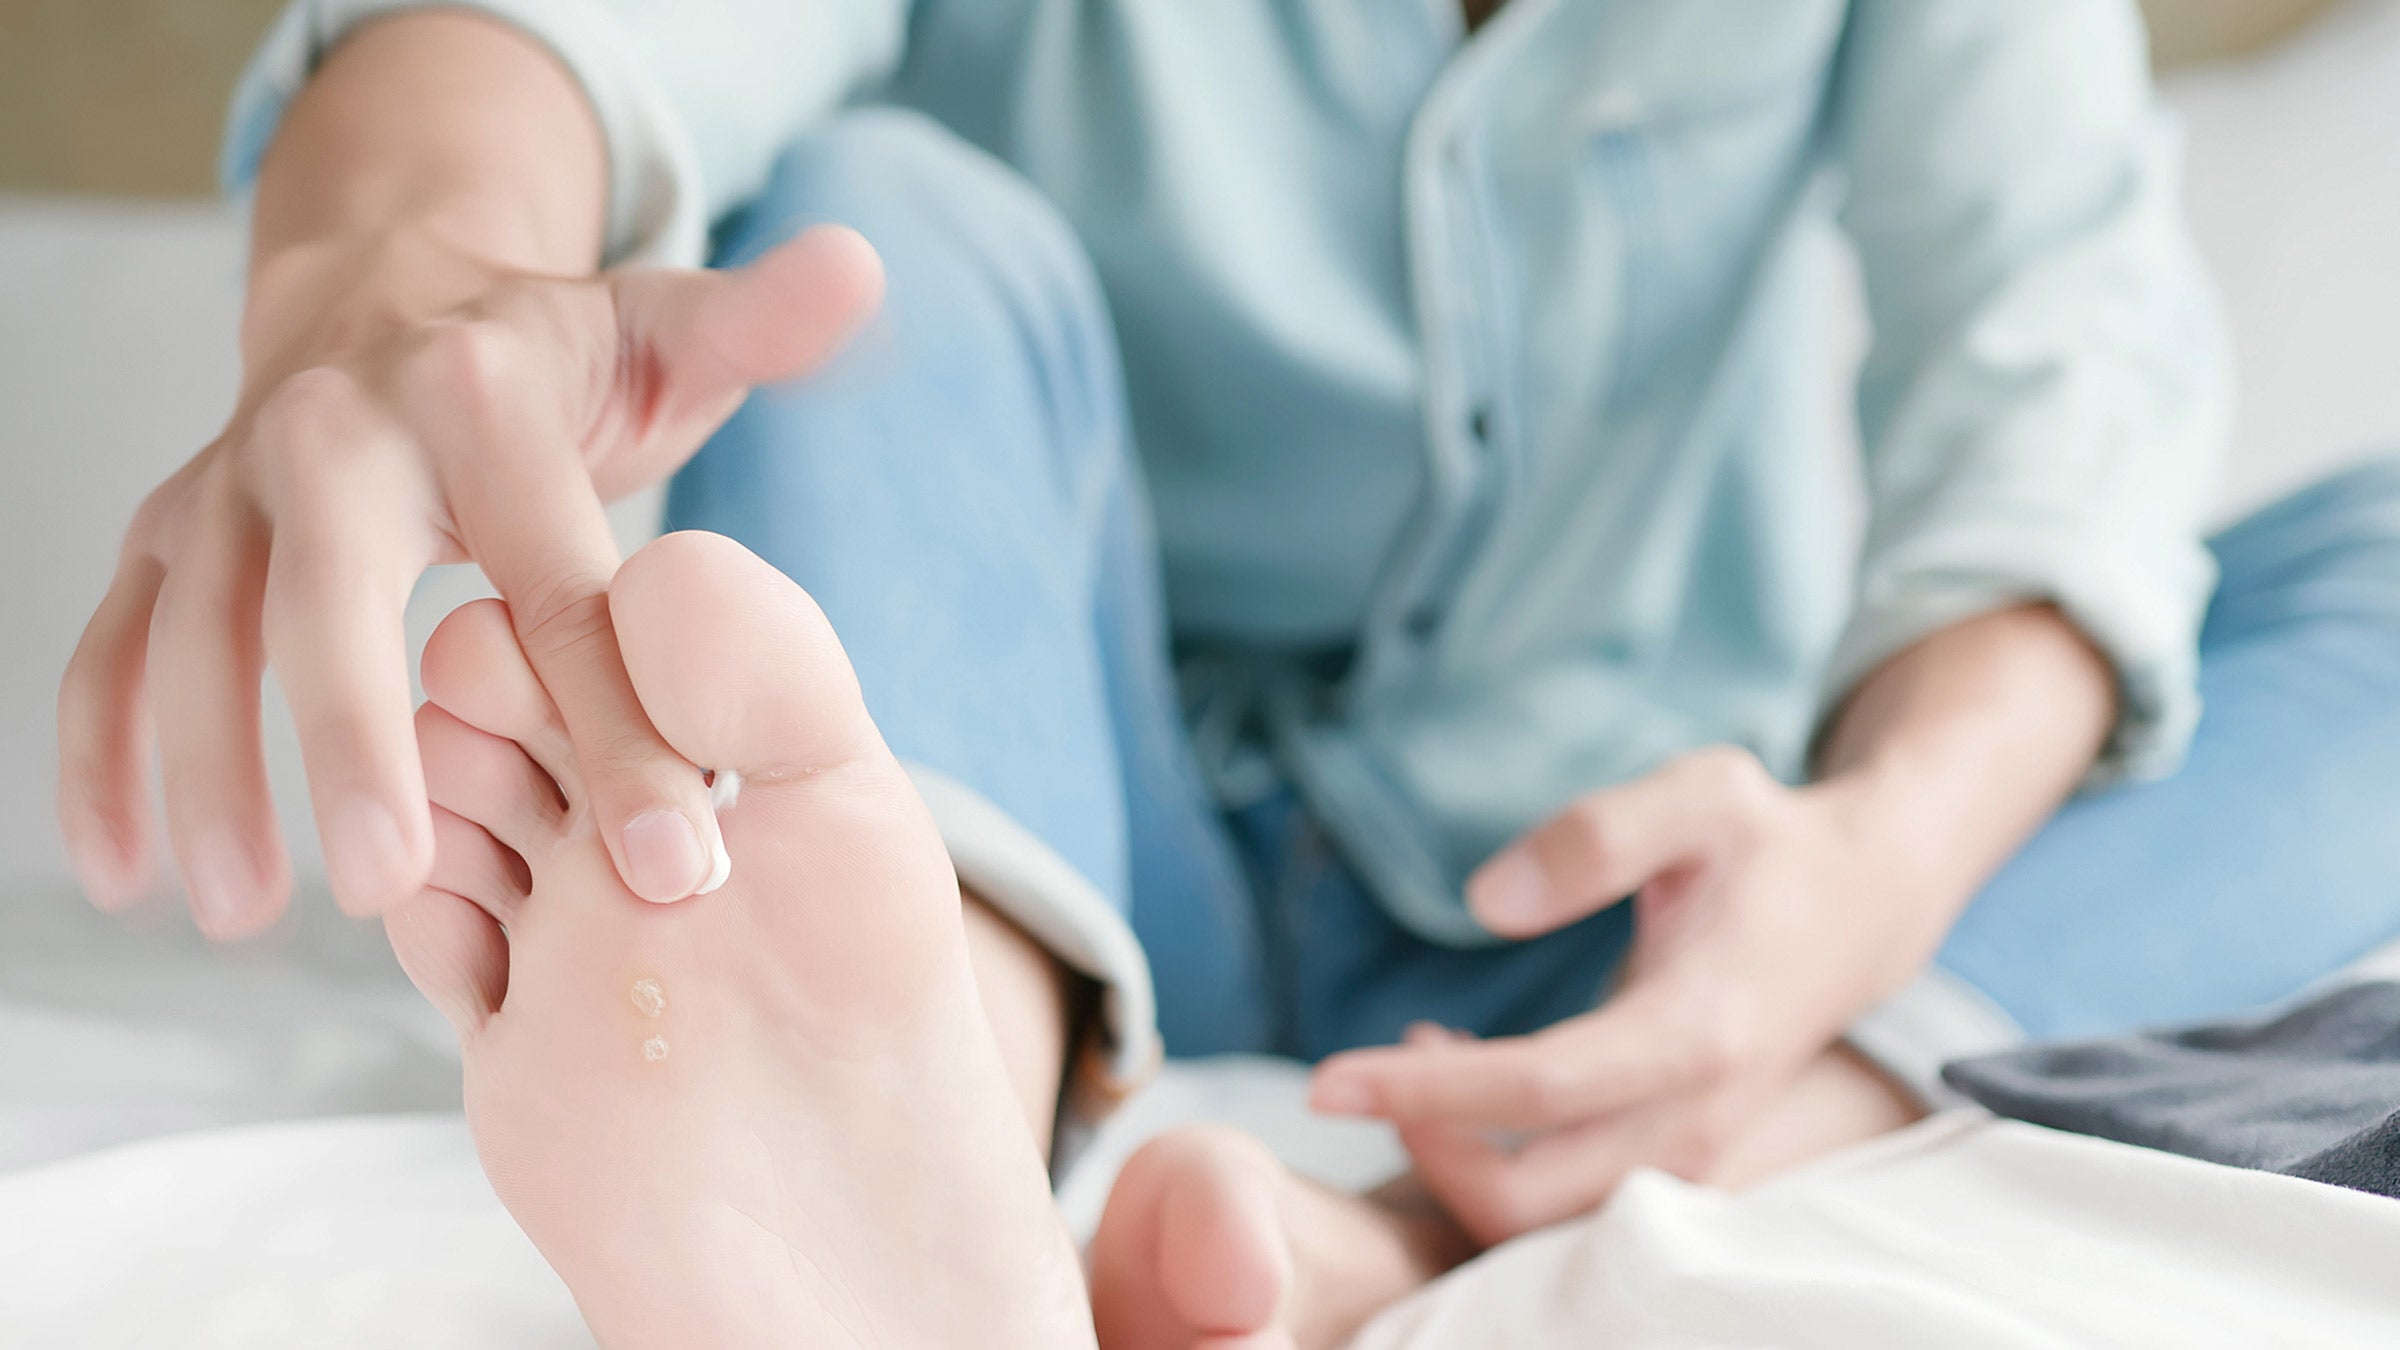 Toenail Fungus Medication: What Works for Nail Fungus? - GoodRx